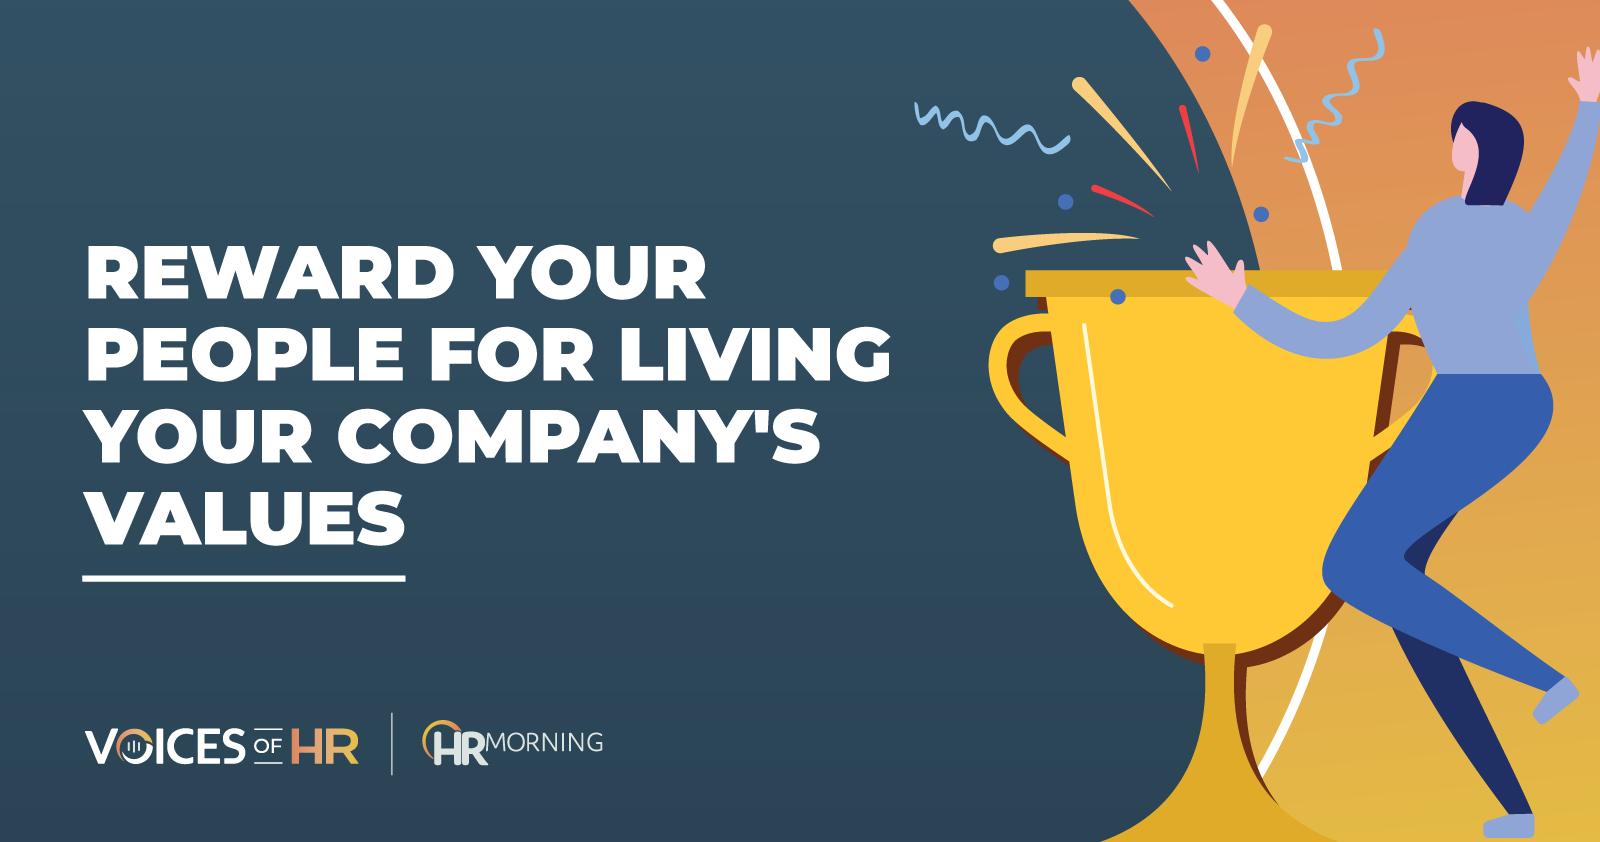 Reward your people for living your company's values